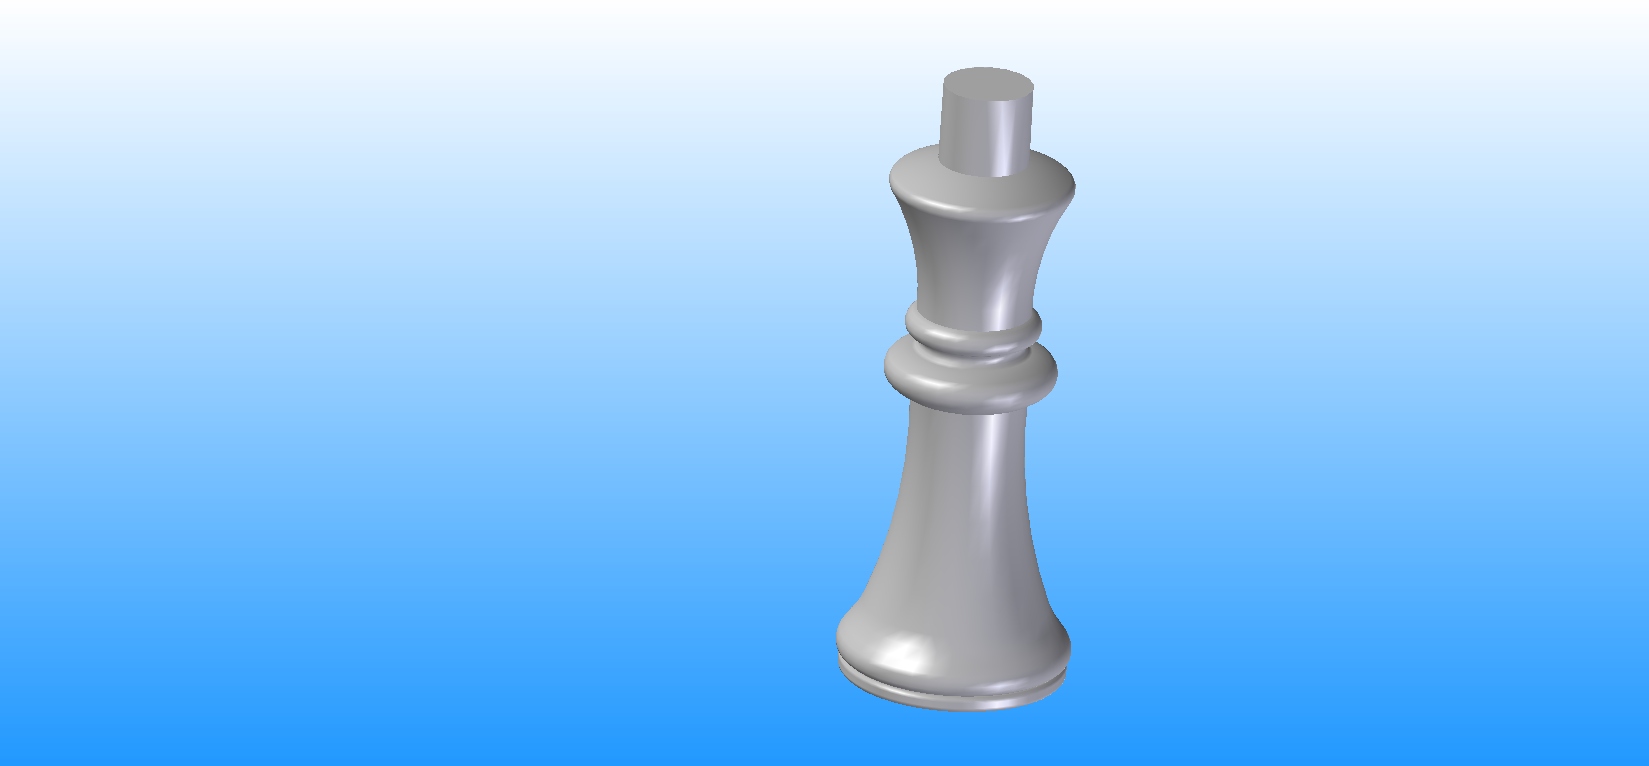 Which piece is the king? - Chess Forums 